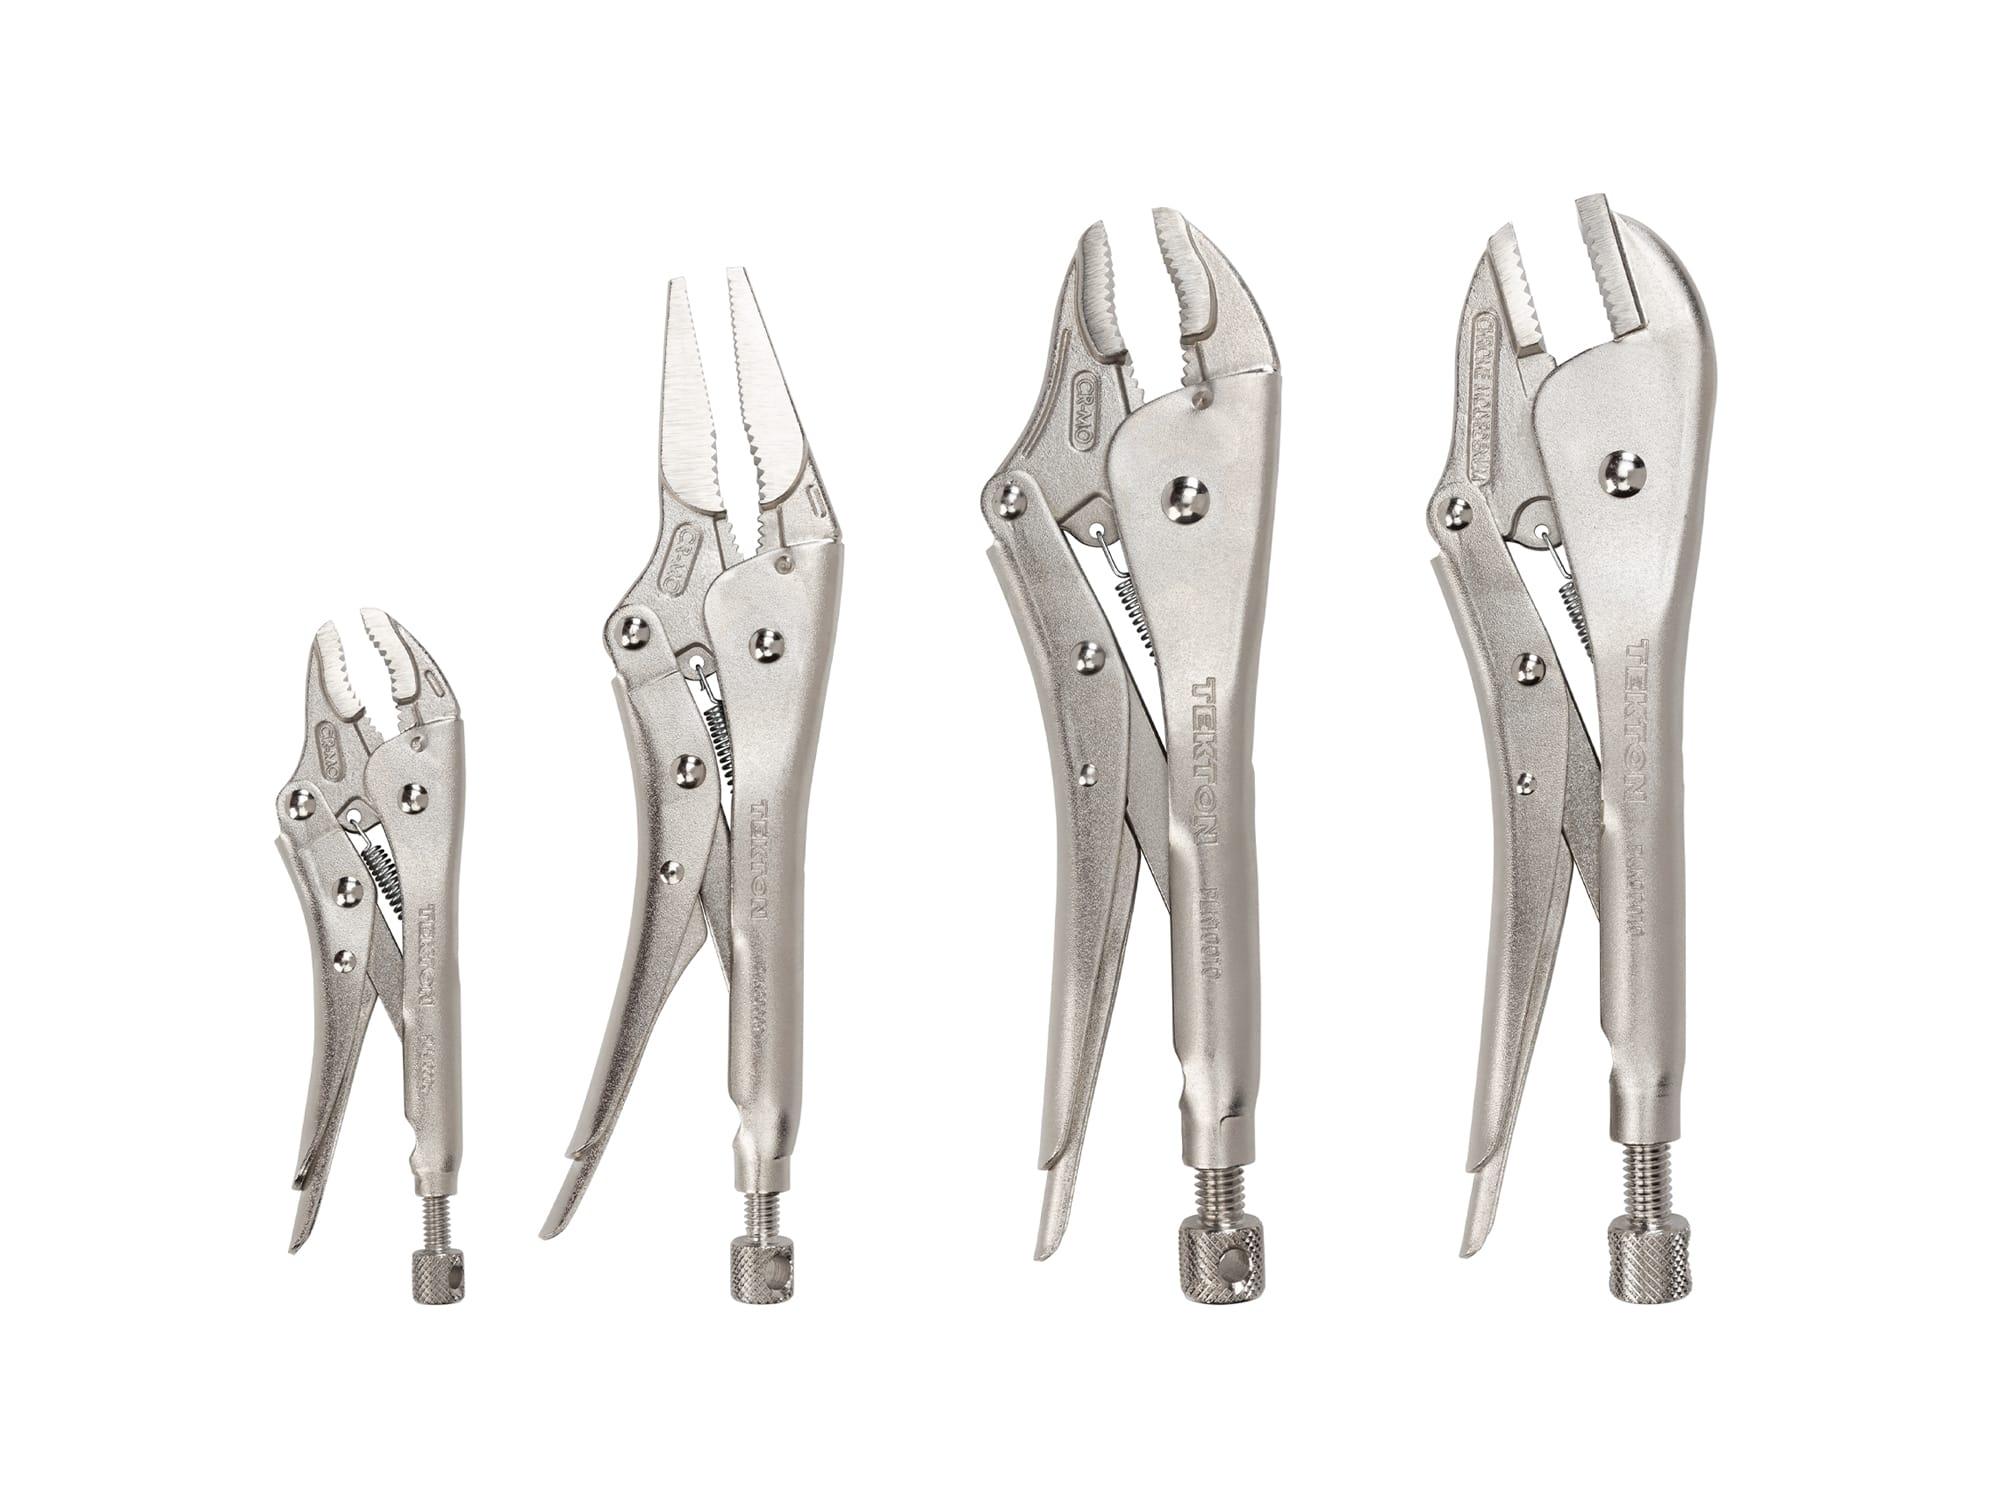 Locking Pliers Set, 4-Piece (Straight Jaw, Curved Jaw, Long Nose)